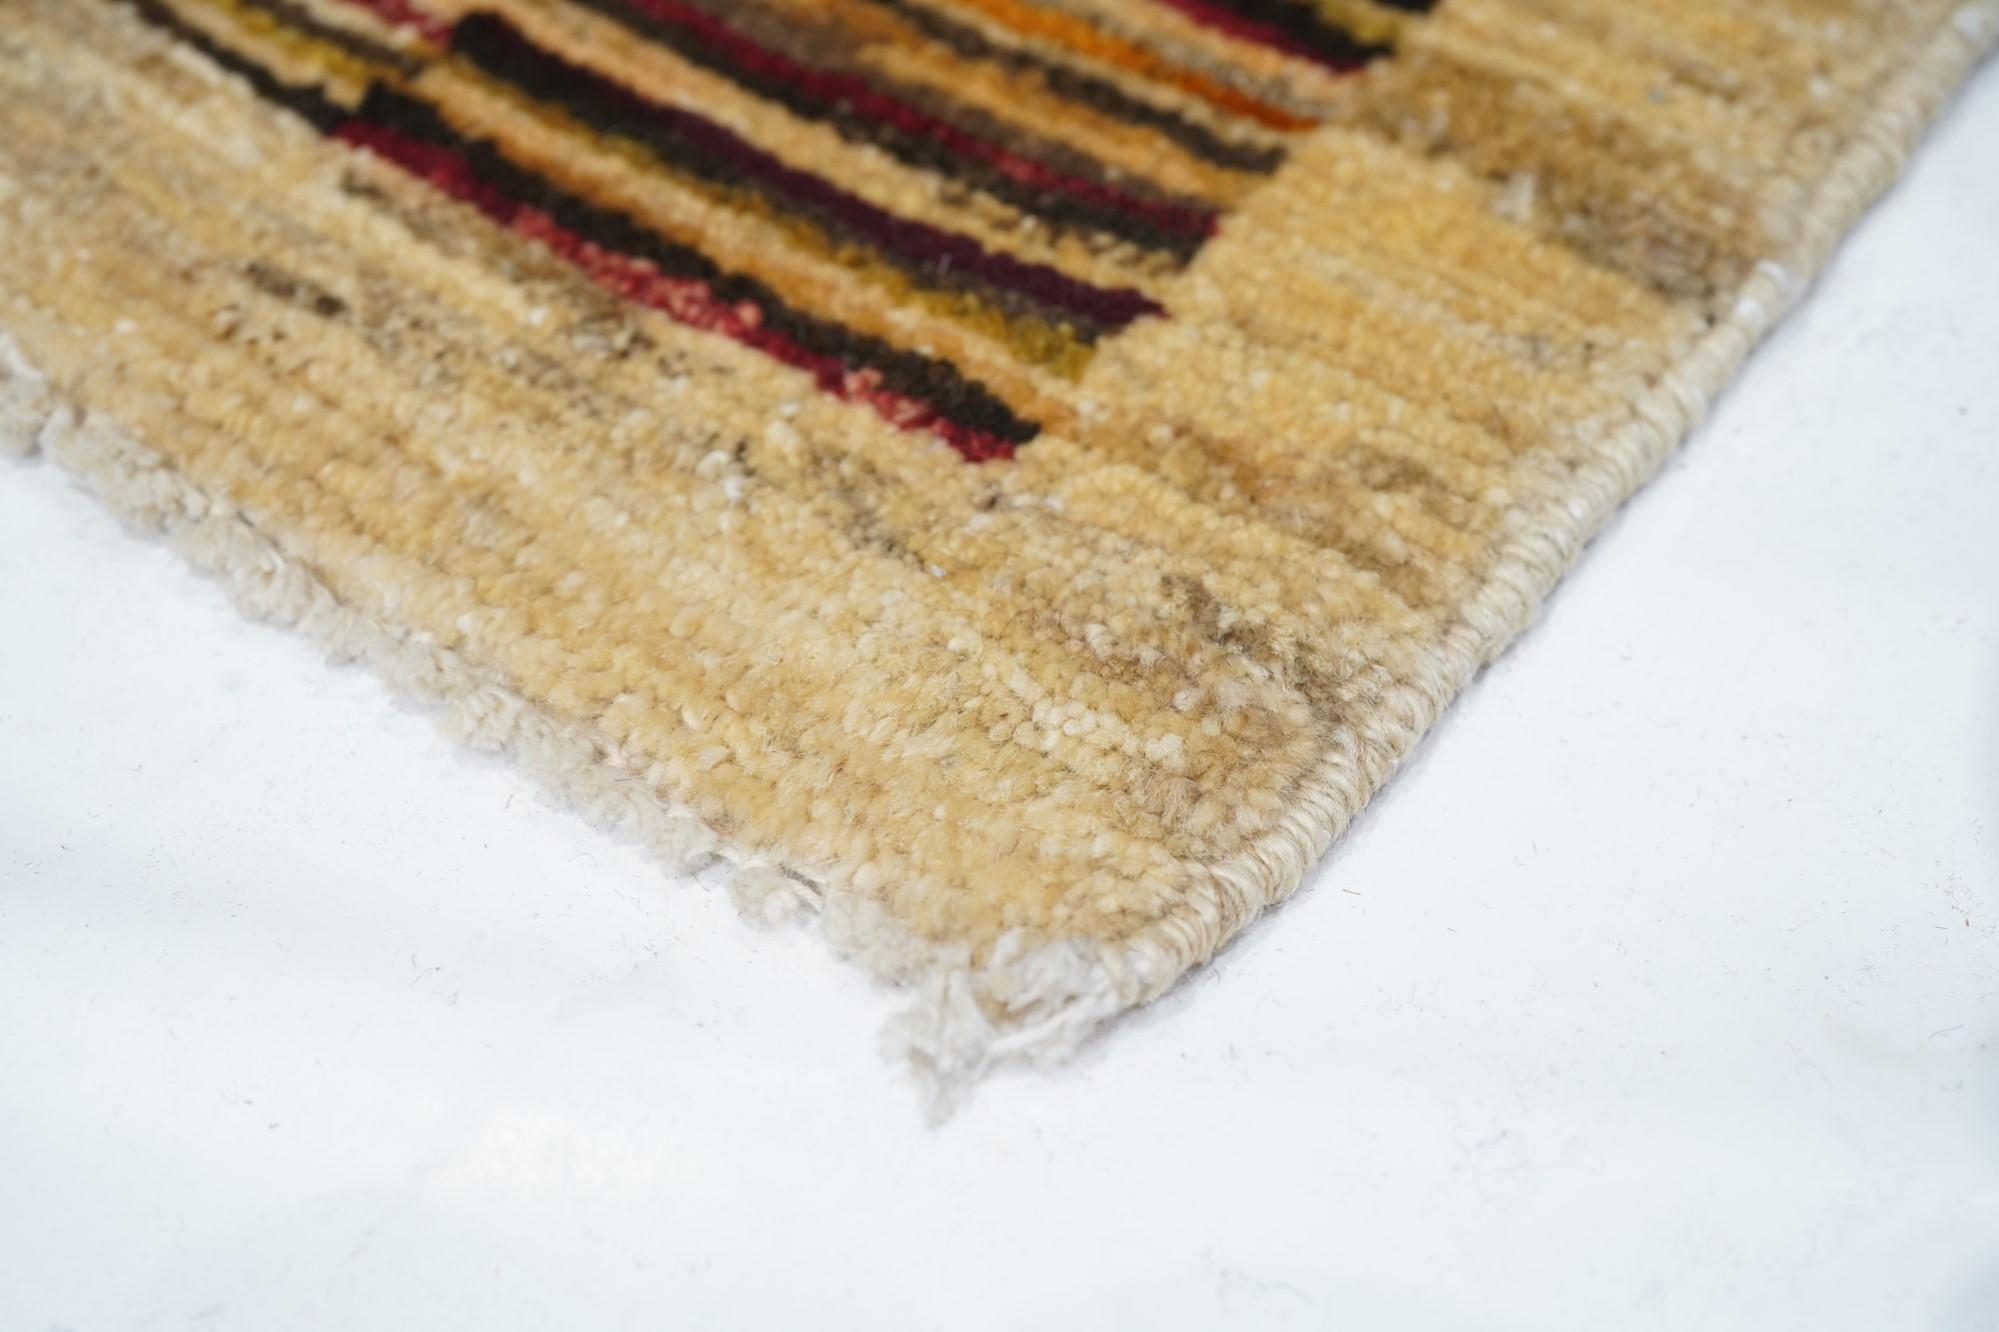 Vintage Gabbeh Rug In Good Condition For Sale In New York, NY